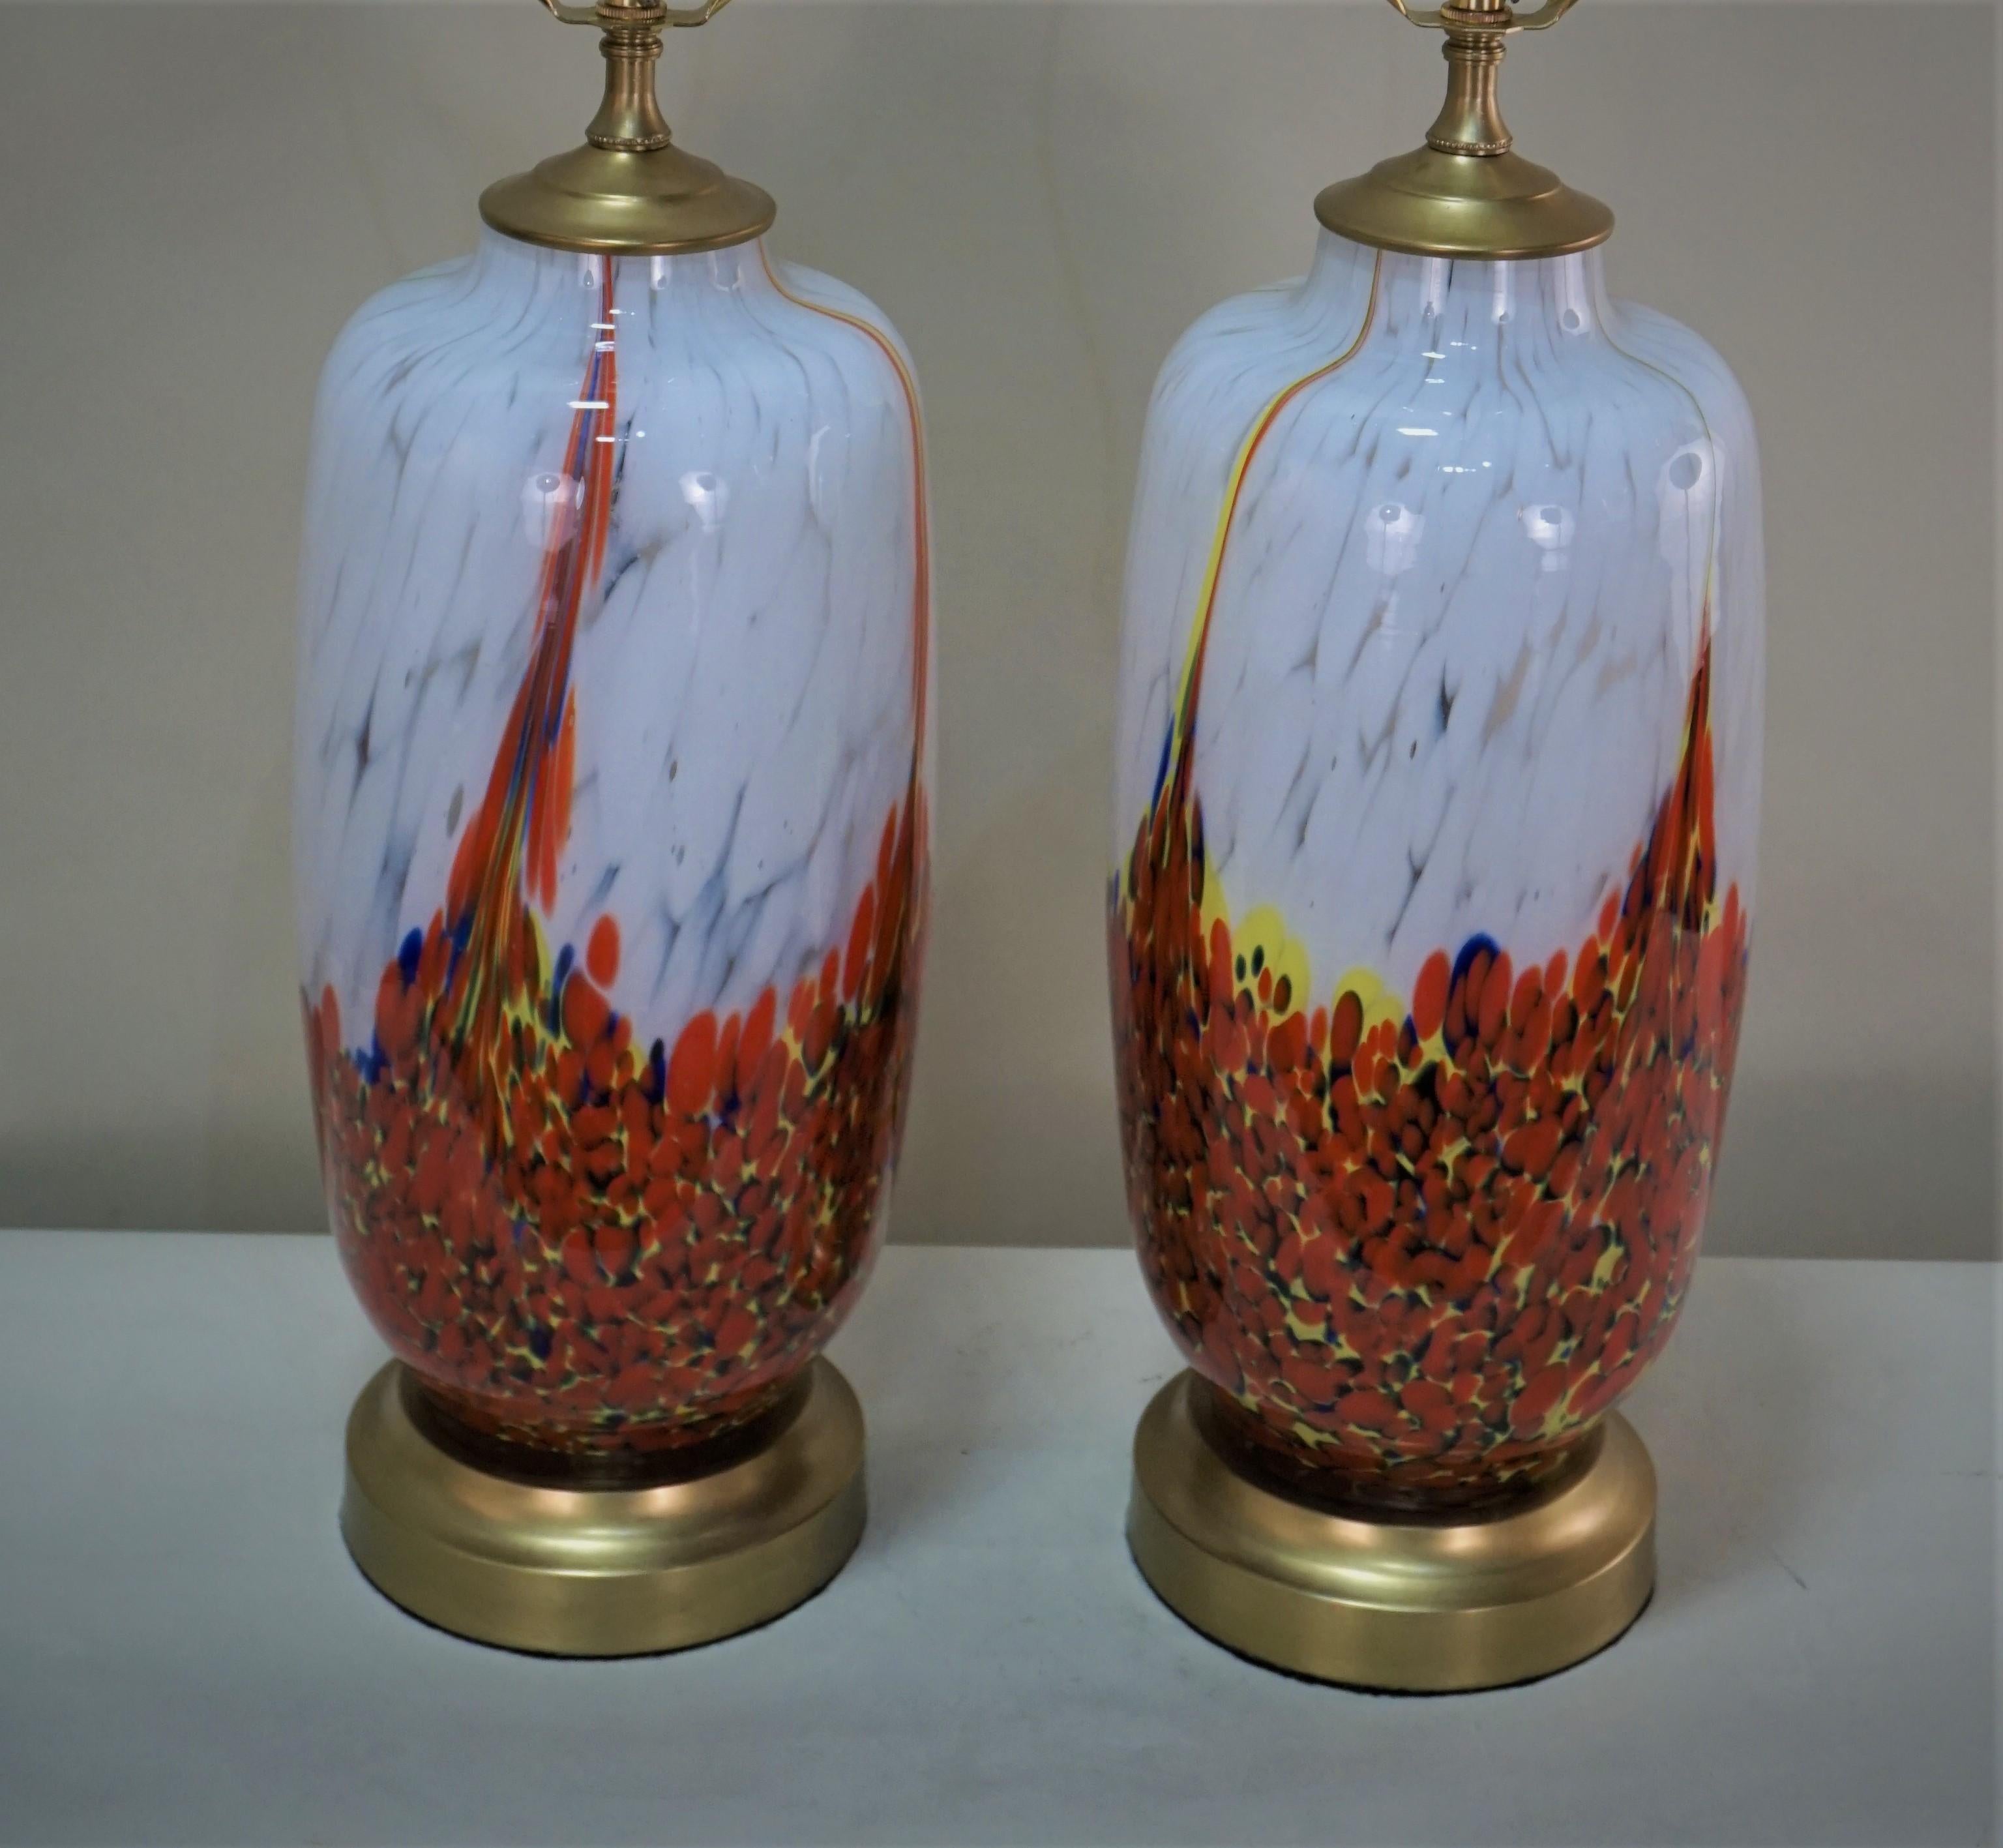 Pair of Murano blown glass vases that have been customized to table lamps.